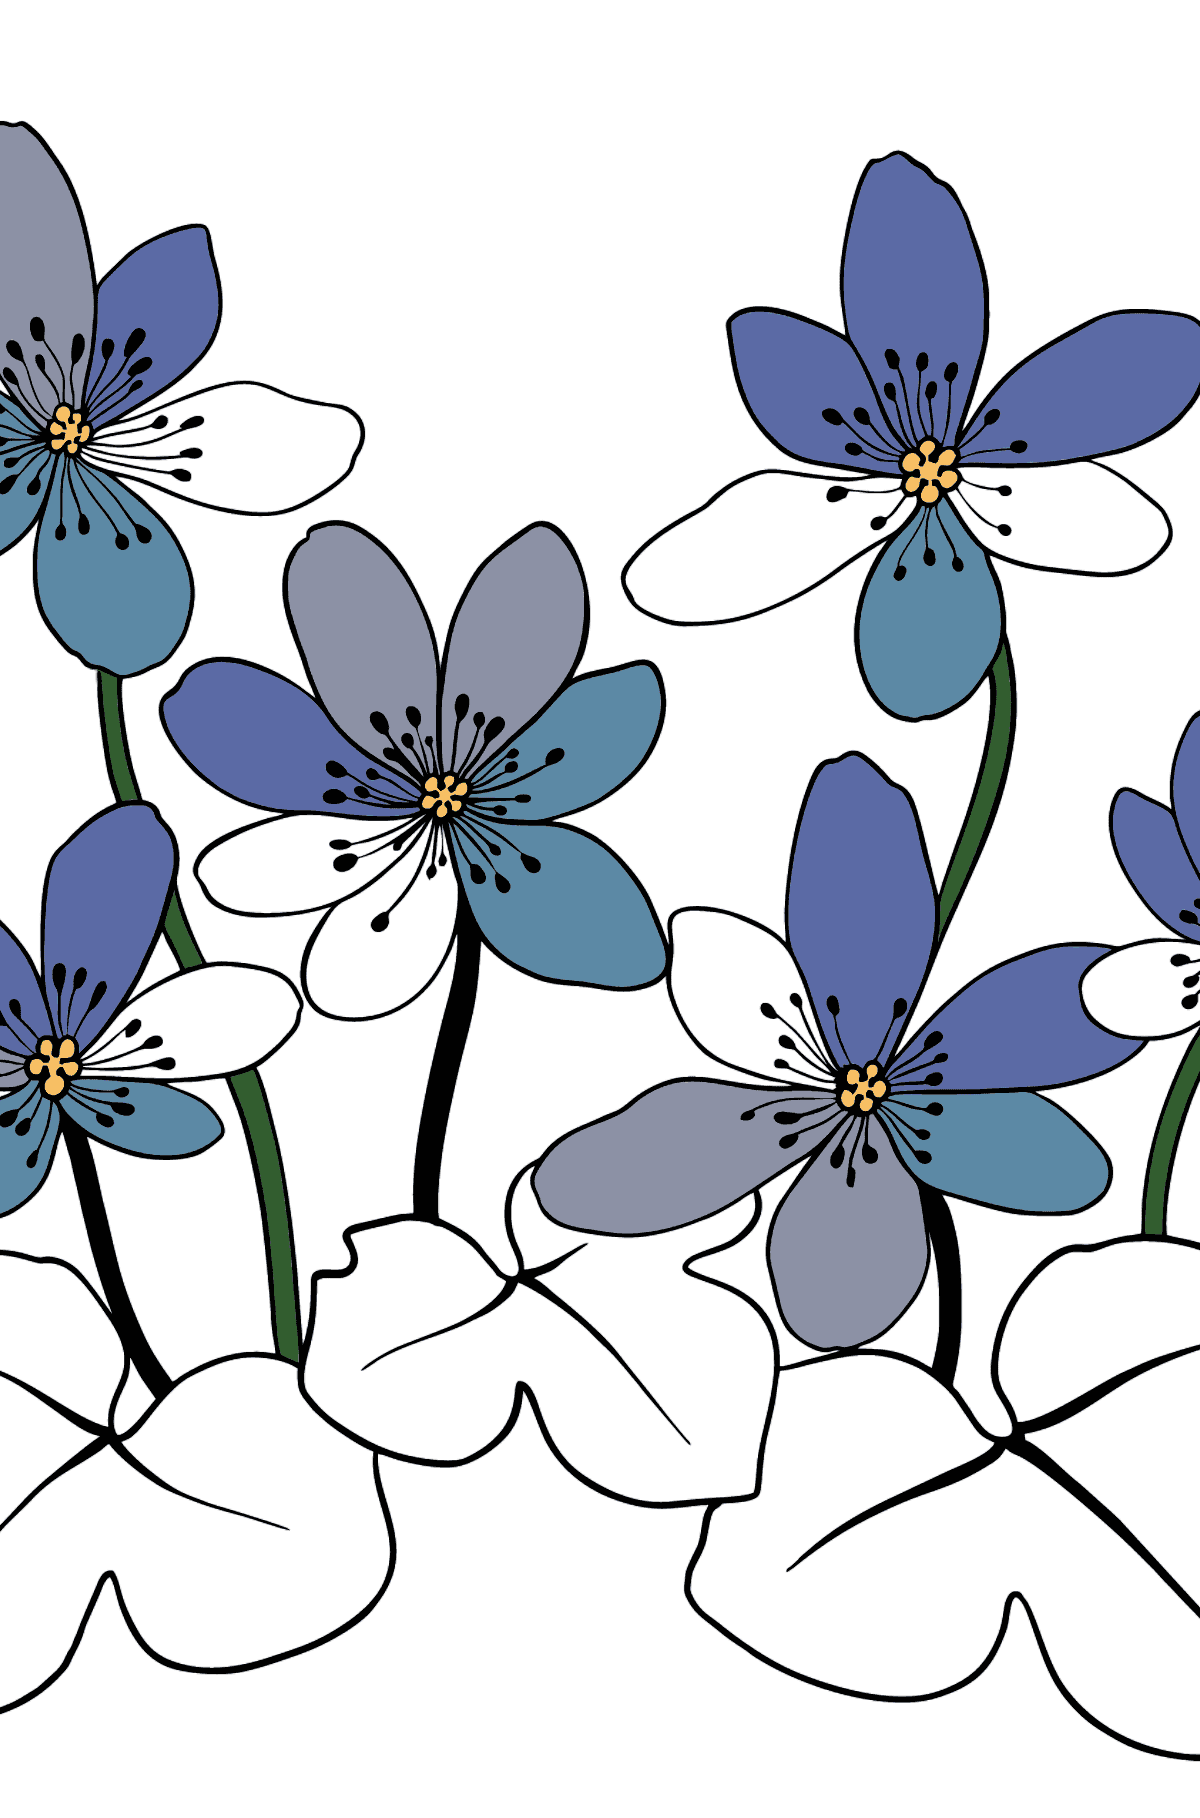 Flower Coloring Page - A Hepatica with Blue Petals - Coloring Pages for Kids